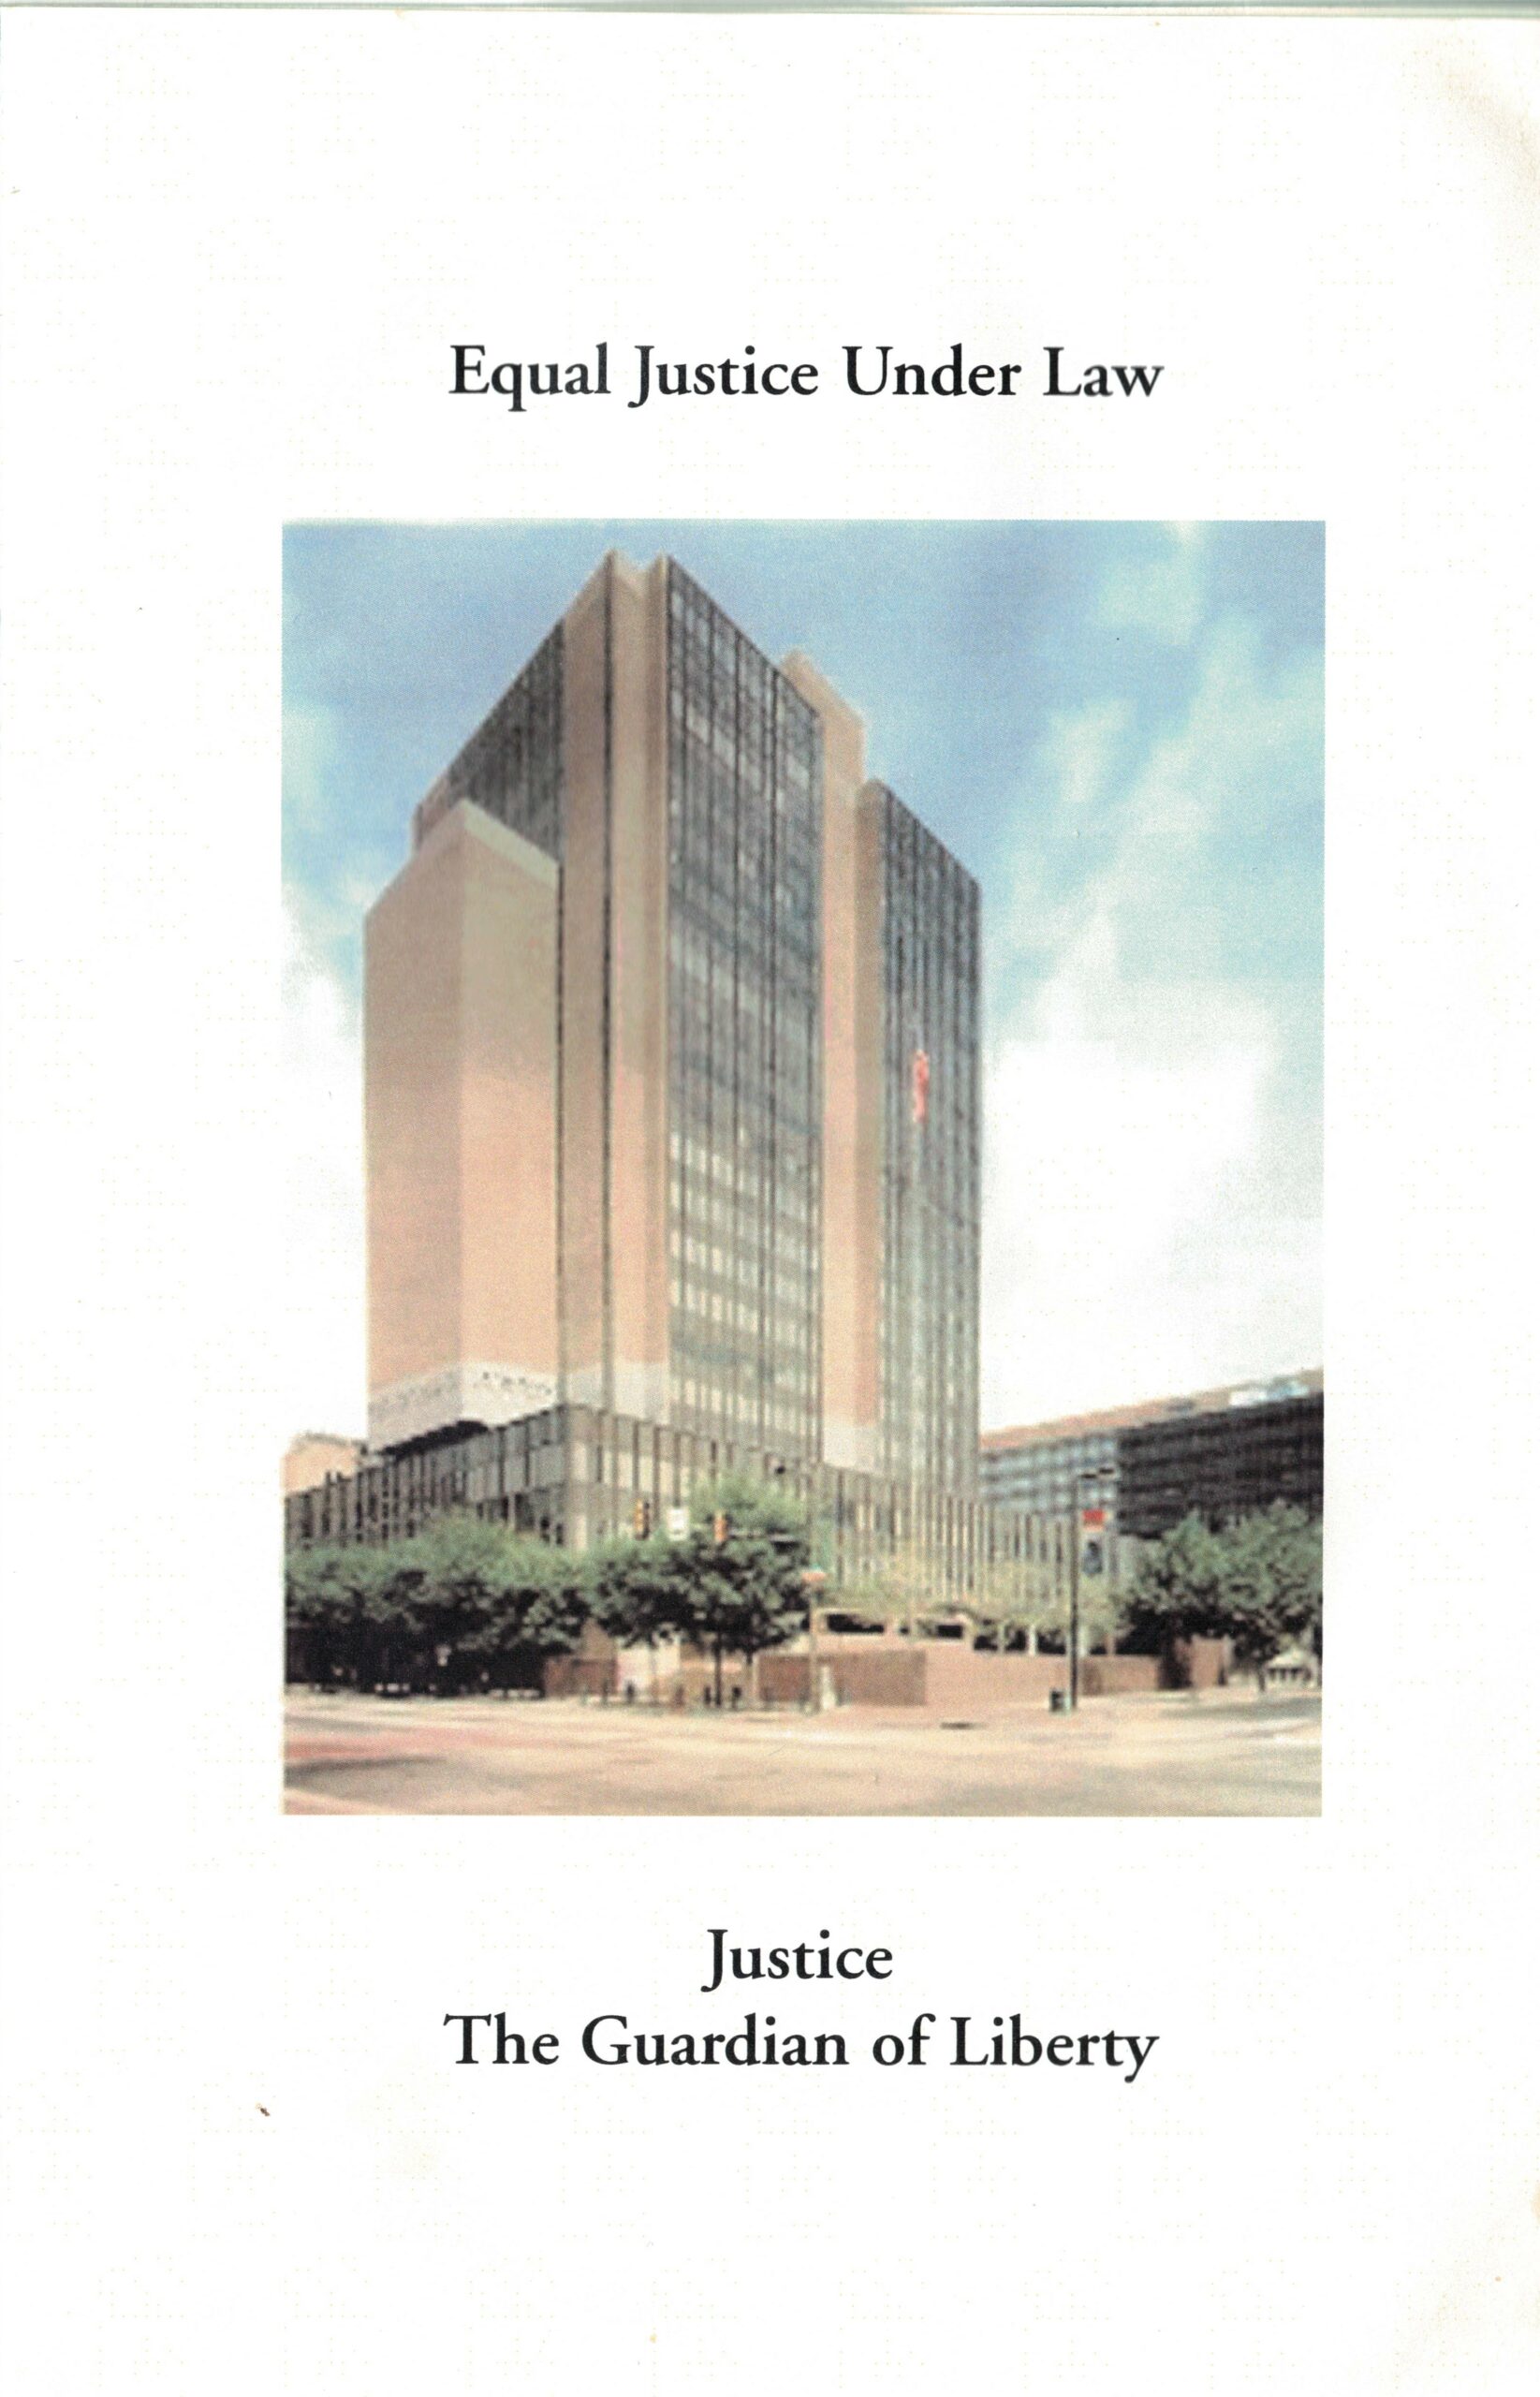 Third page of the Jones program pamphlet with building